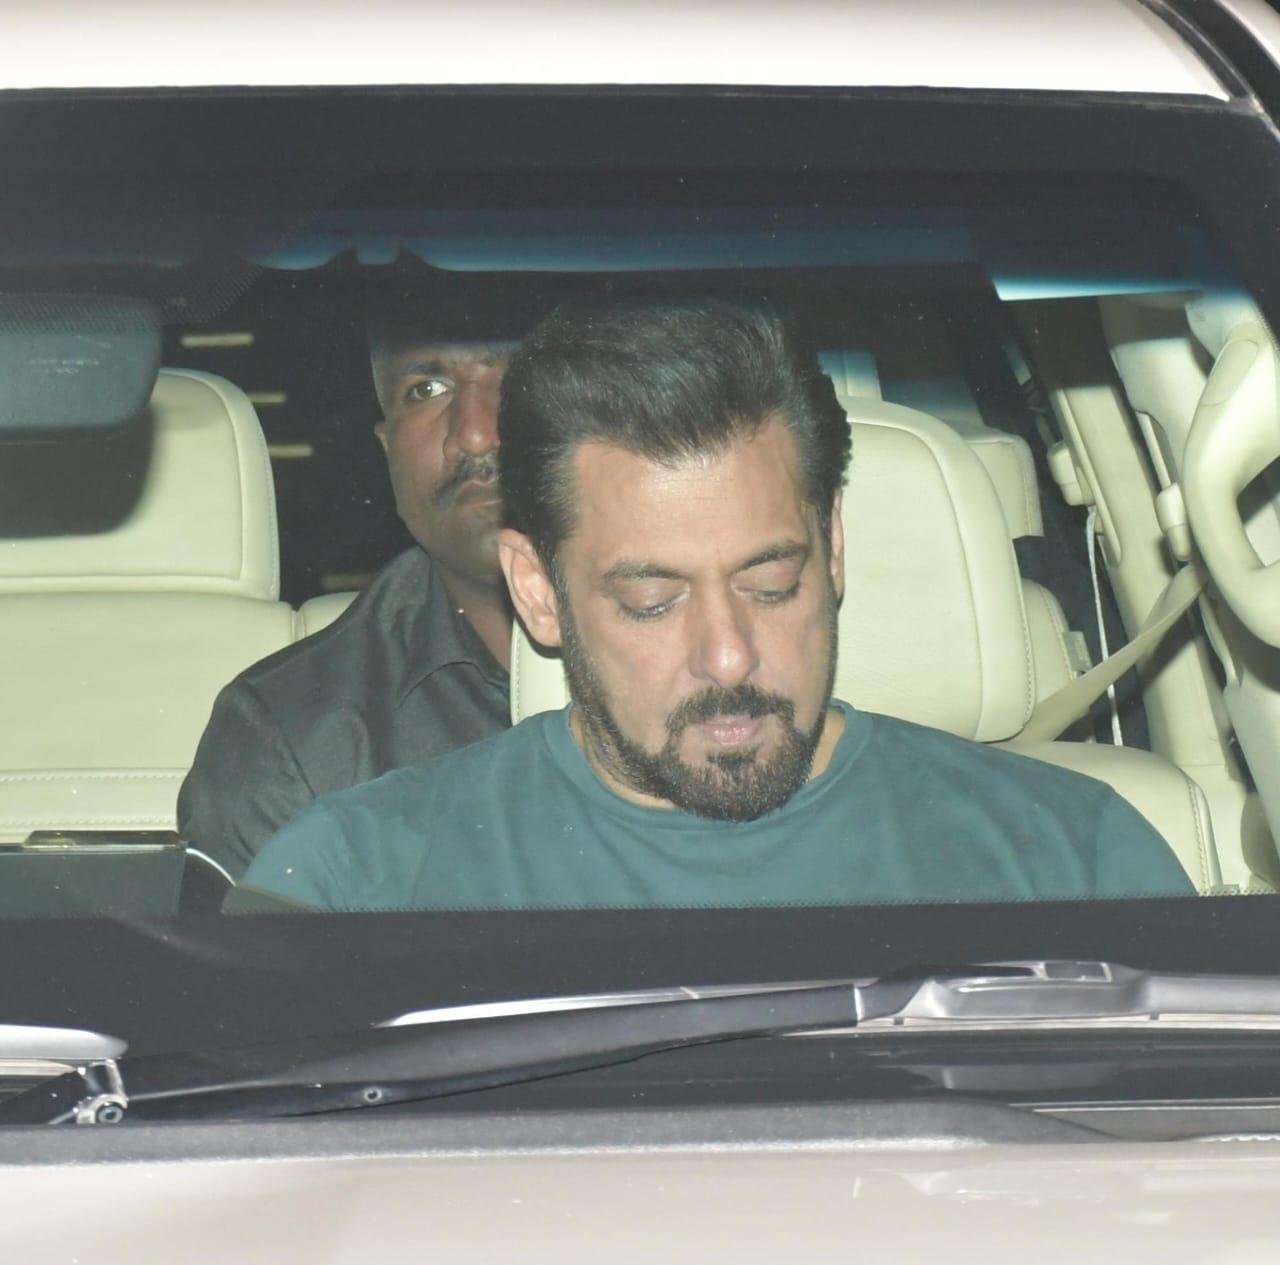 Salman Khan arrived at the airport this morning. The actor was spotted at the private airport in Kalina